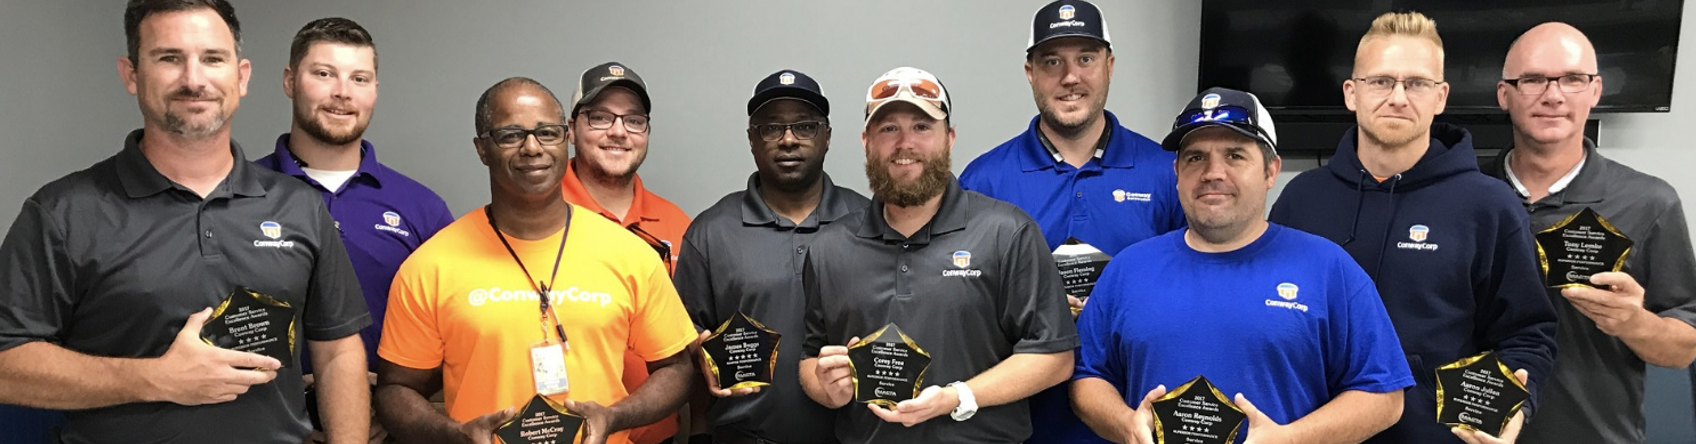 Conway Corp employees win regional customer service awards